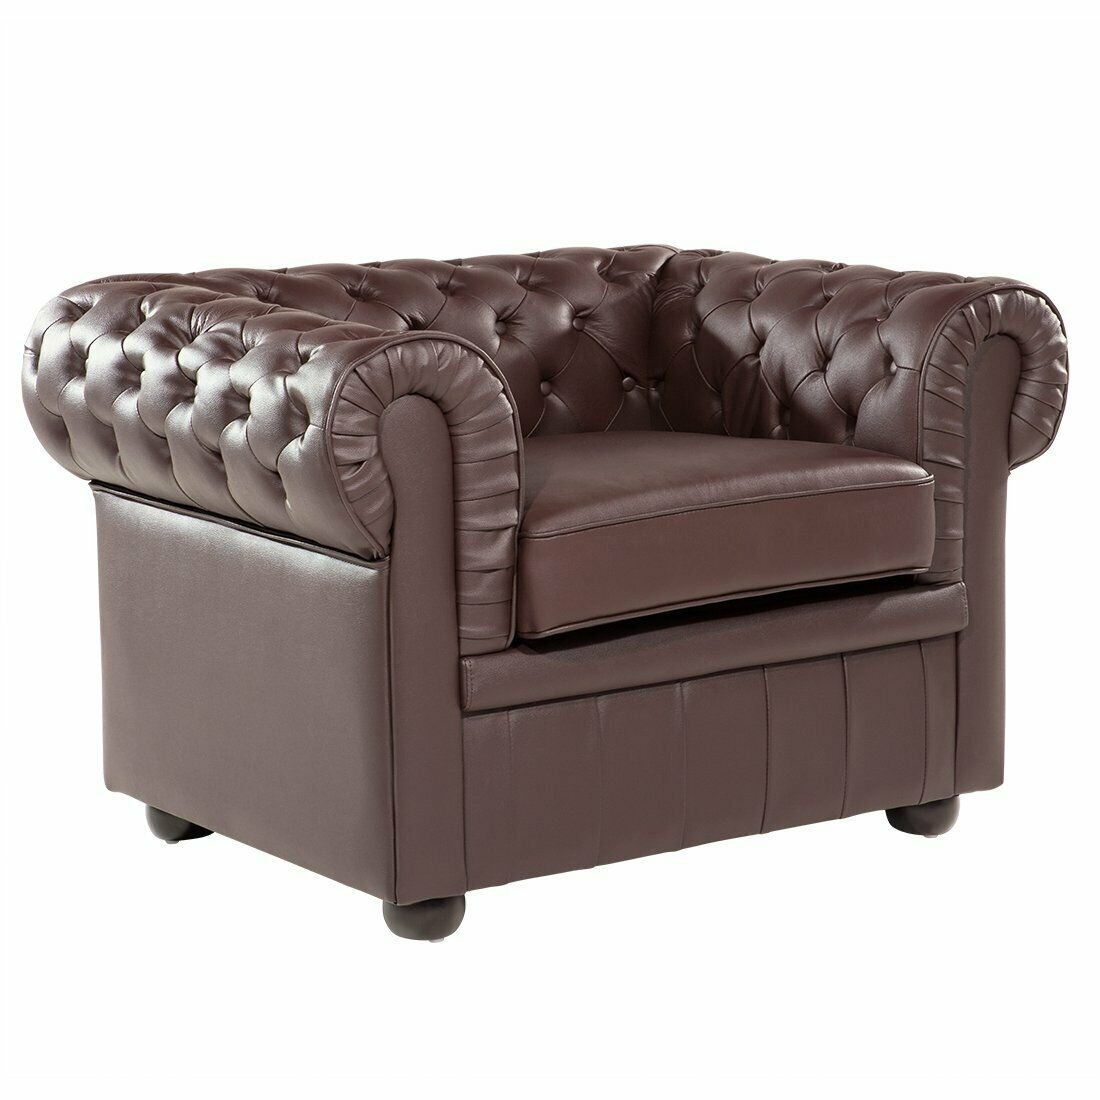 Accent Club Chair Traditional Modern Tufted Brown Leather Chesterfield